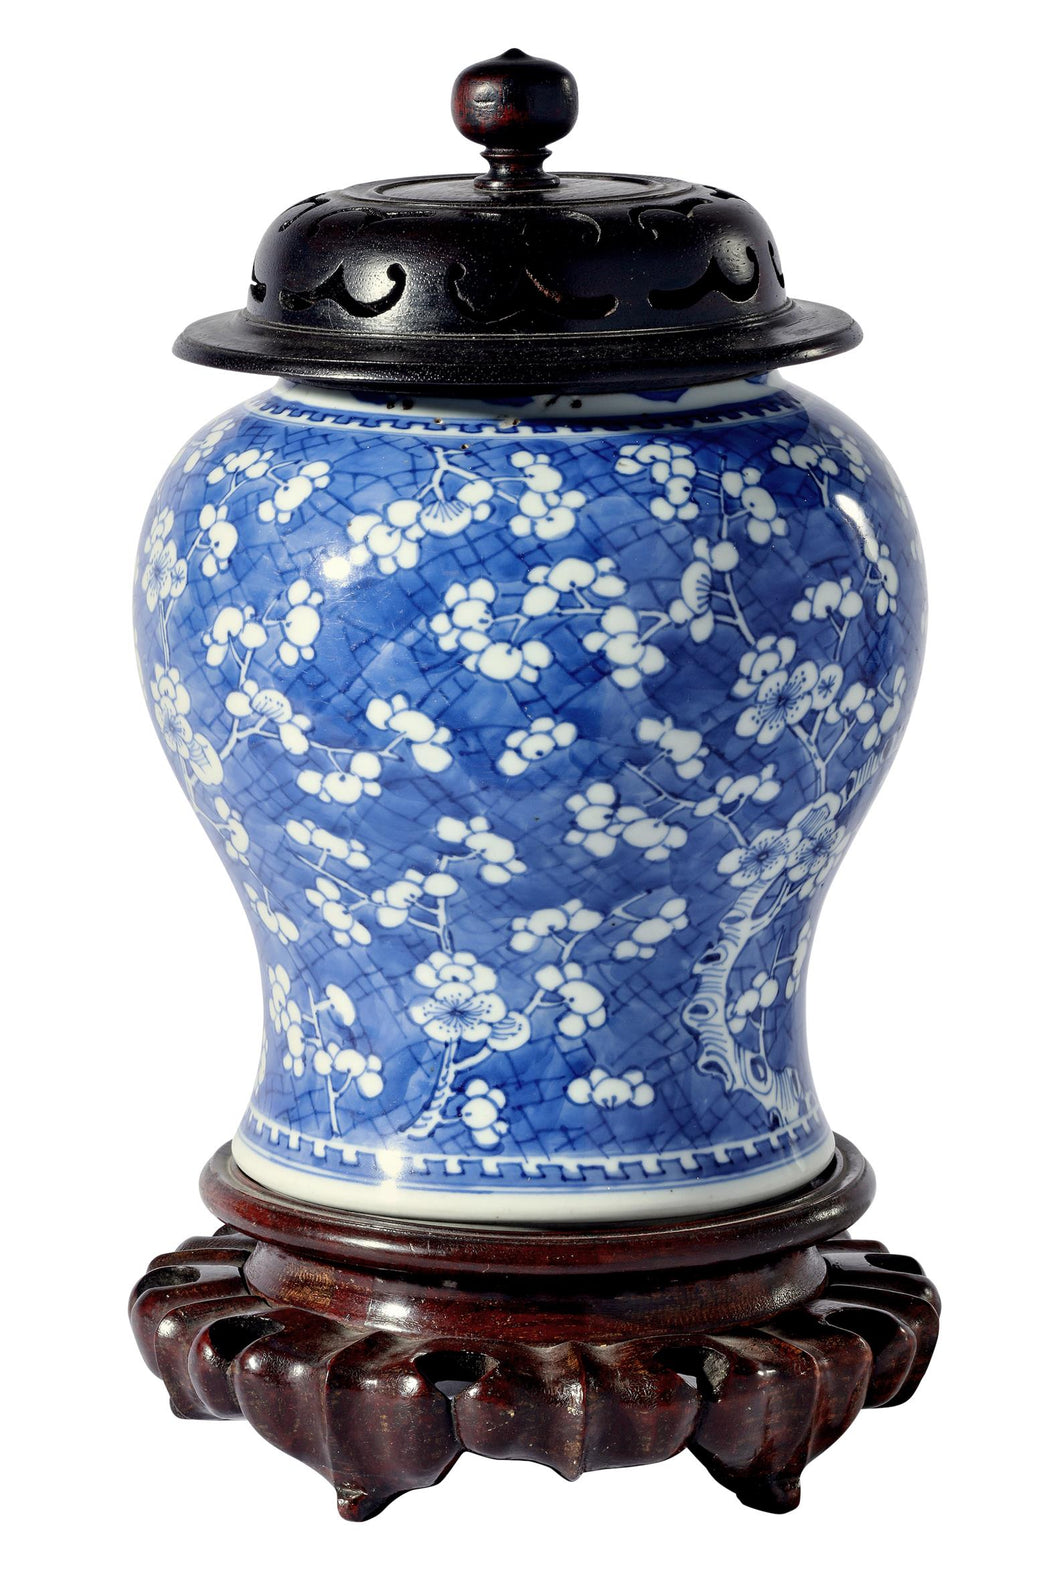 A CHINESE BLUE AND WHITE PORCELAIN VASE, 18TH CENTURY